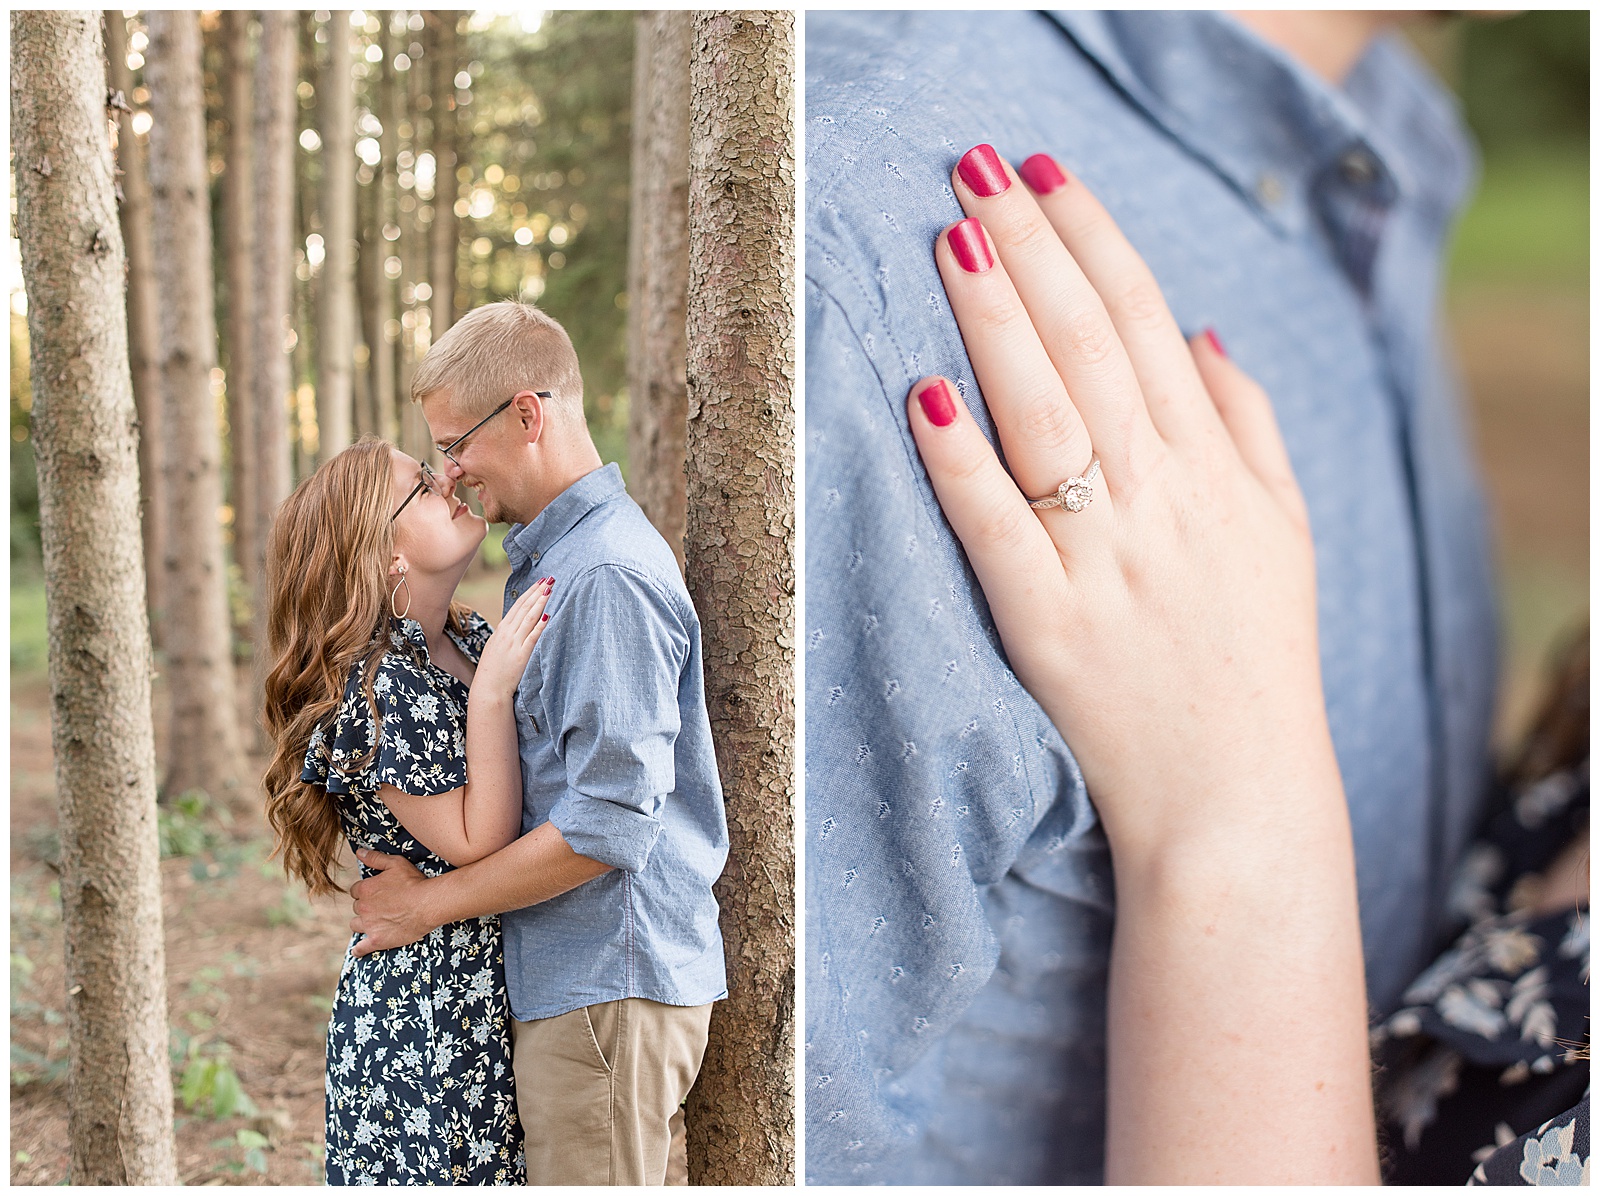 engagement session photos at Overlook Park during the summer in a grove of pine trees